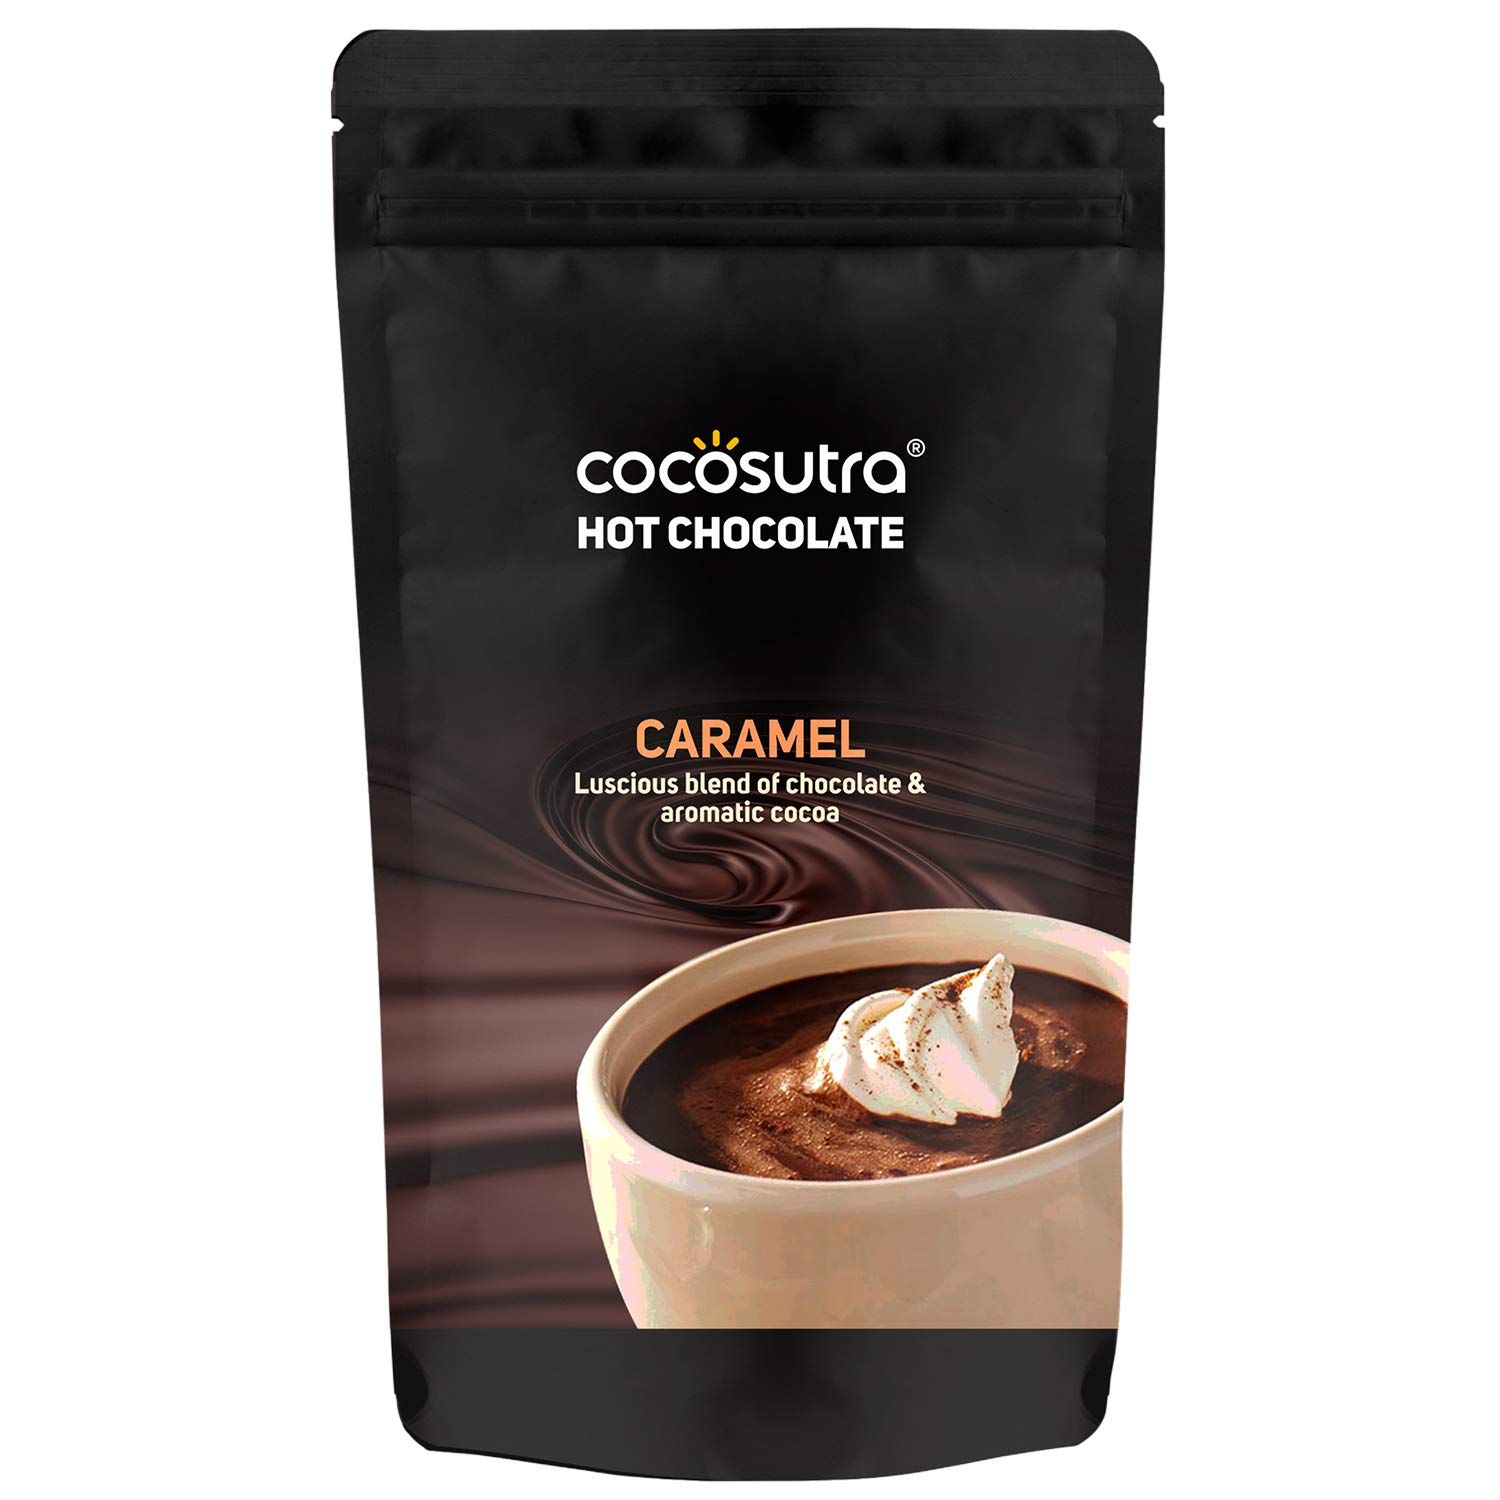 Cocosutra Hot Chocolate Caramel Image